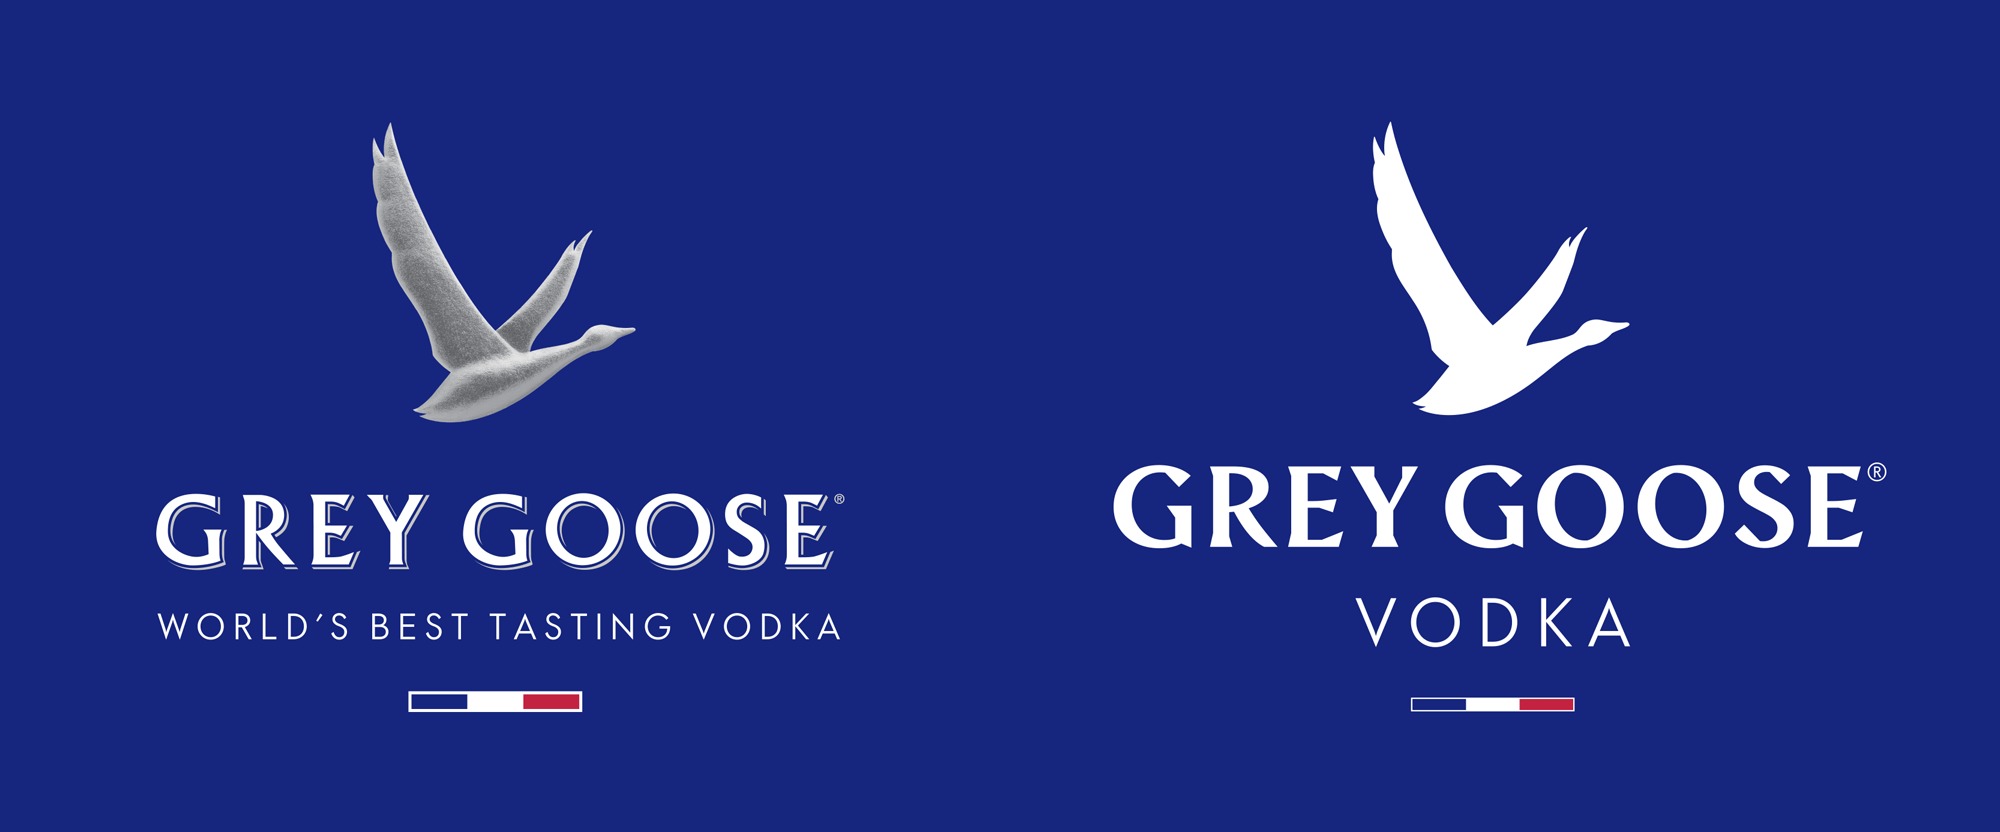 Brand New: New Logo, Identity, and Packaging for Grey Goose by Ragged Edge